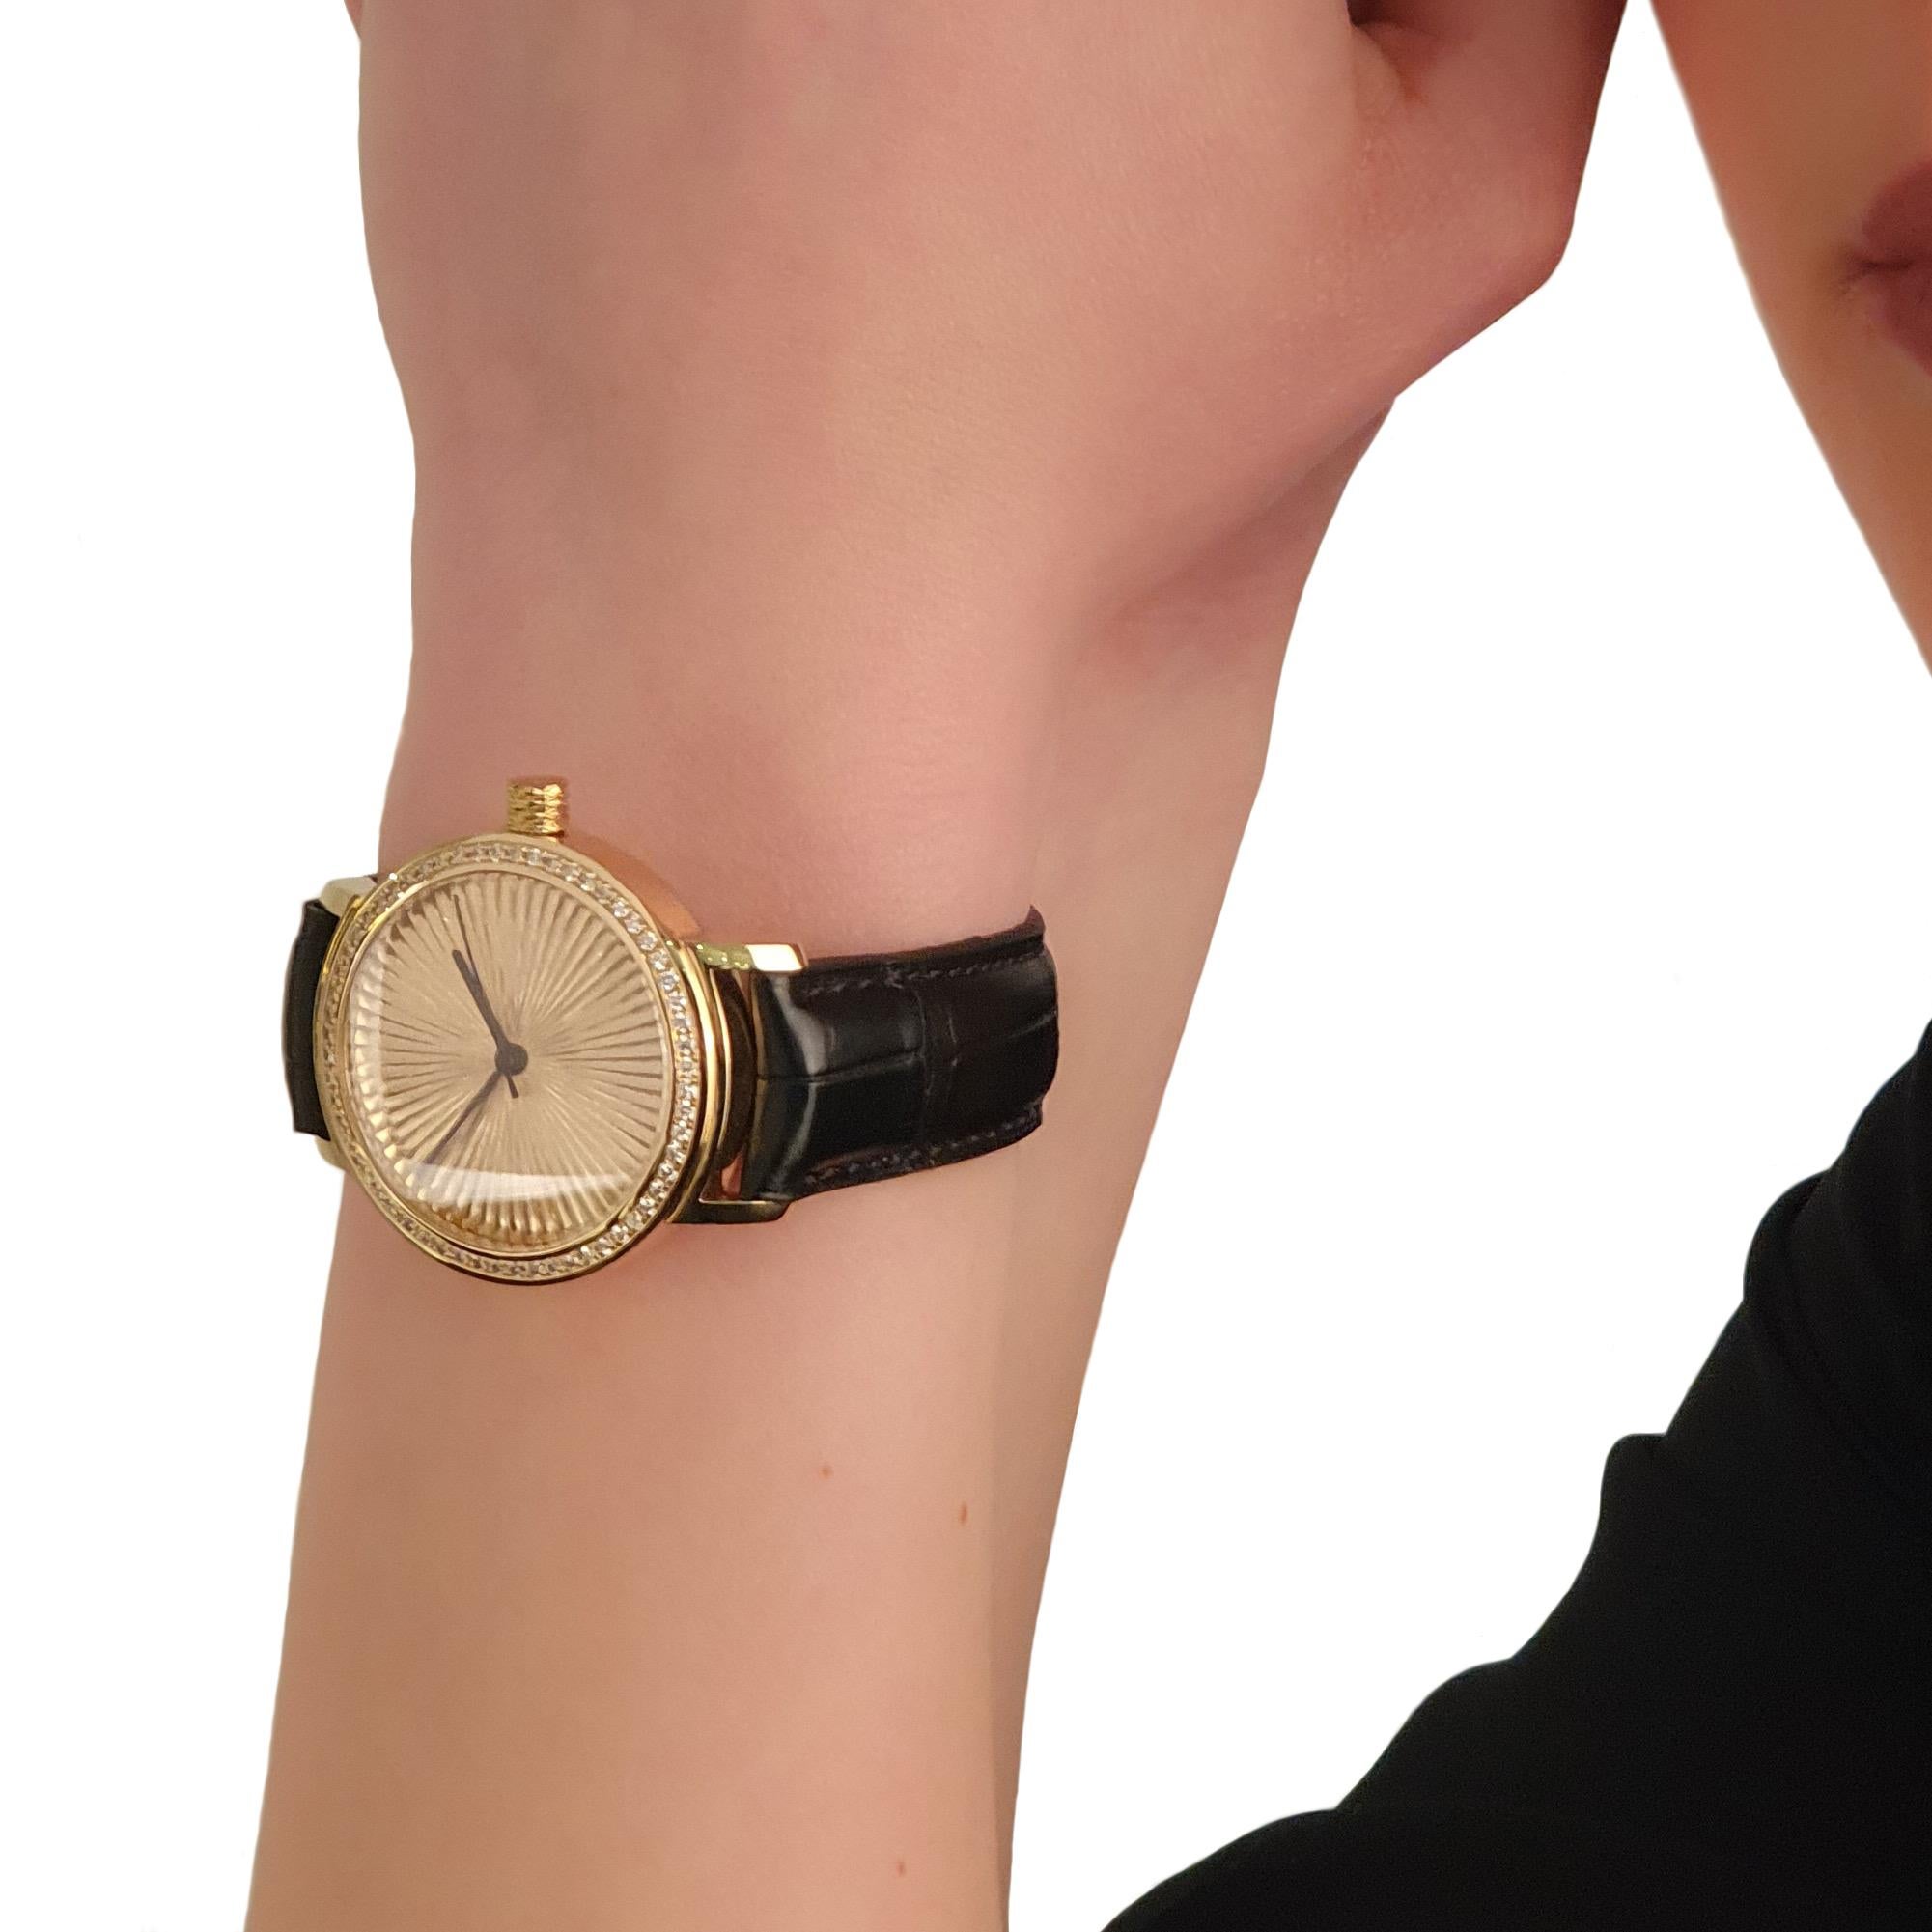 Nº2 with 60 brilliant cut Diamonds Yellow Gold Wristwatch  Cober Jewellery

This is a Cober Nº2 - A Limited-Edition Watch.
Introducing the Cober Nº2 - a limited-edition watch designed to make a statement. This exquisite timepiece stands out for its